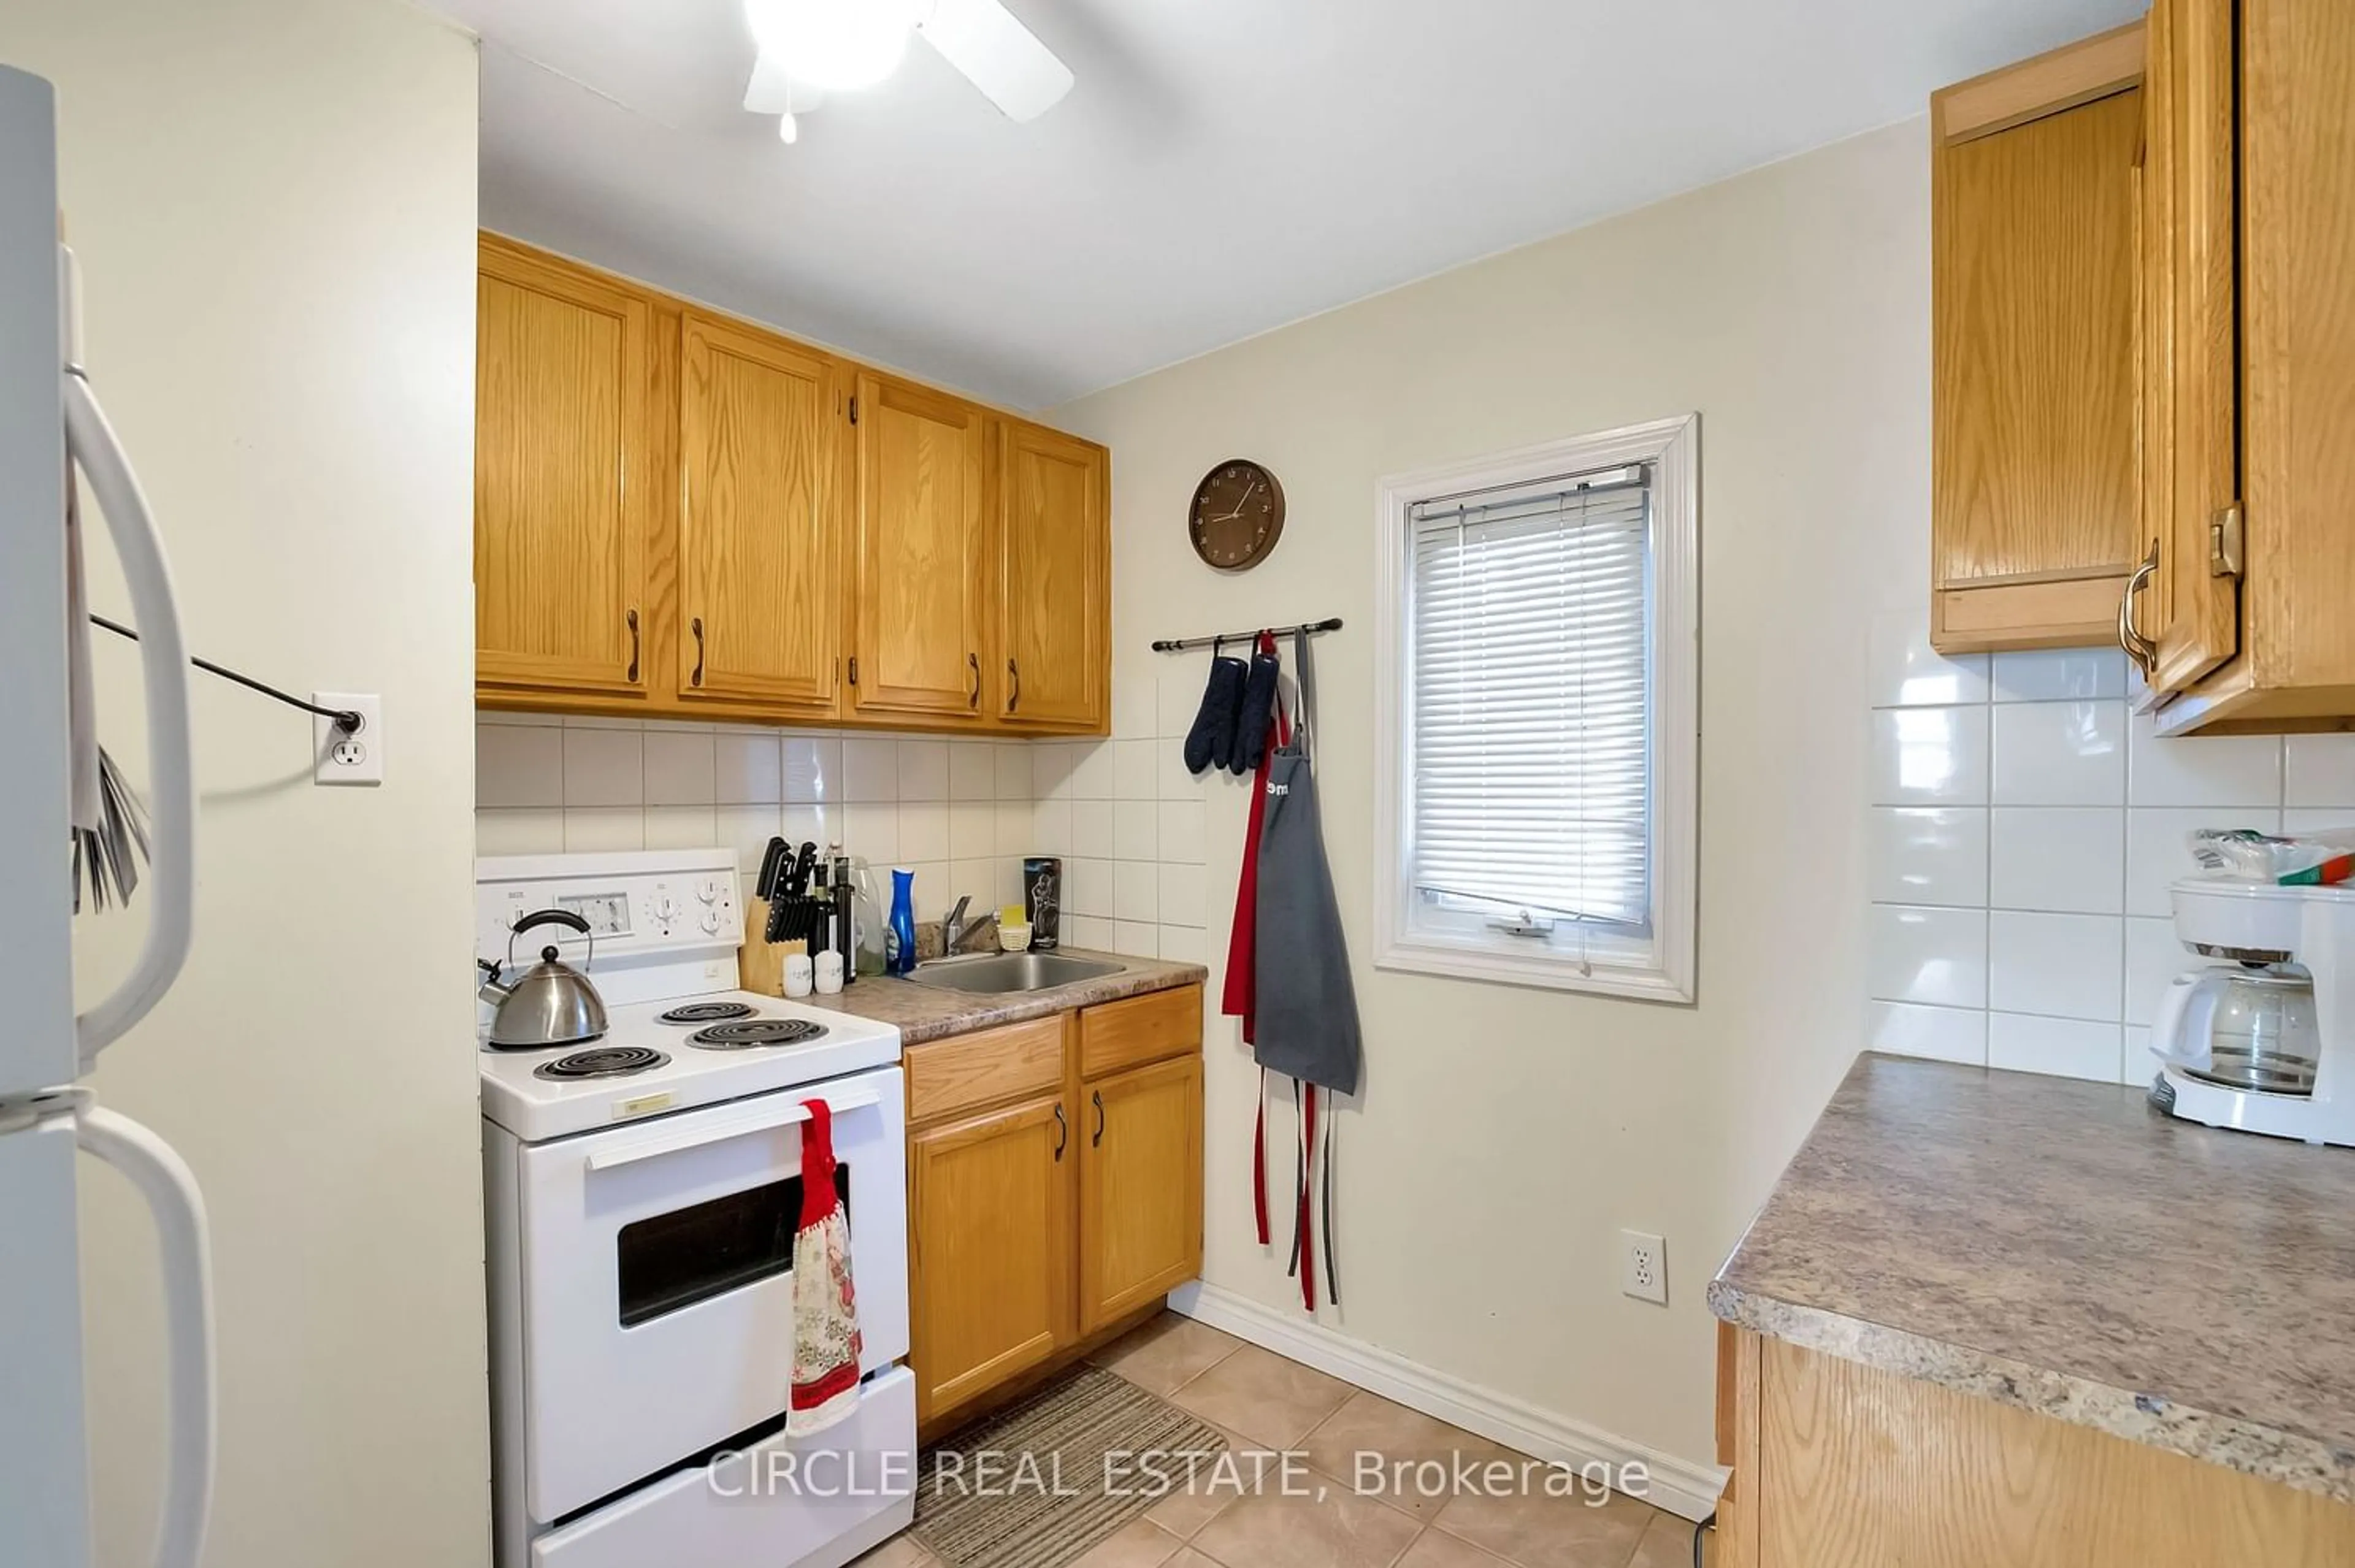 Standard kitchen for 1162 Richmond St #1160, Windsor Ontario N9A 4A4